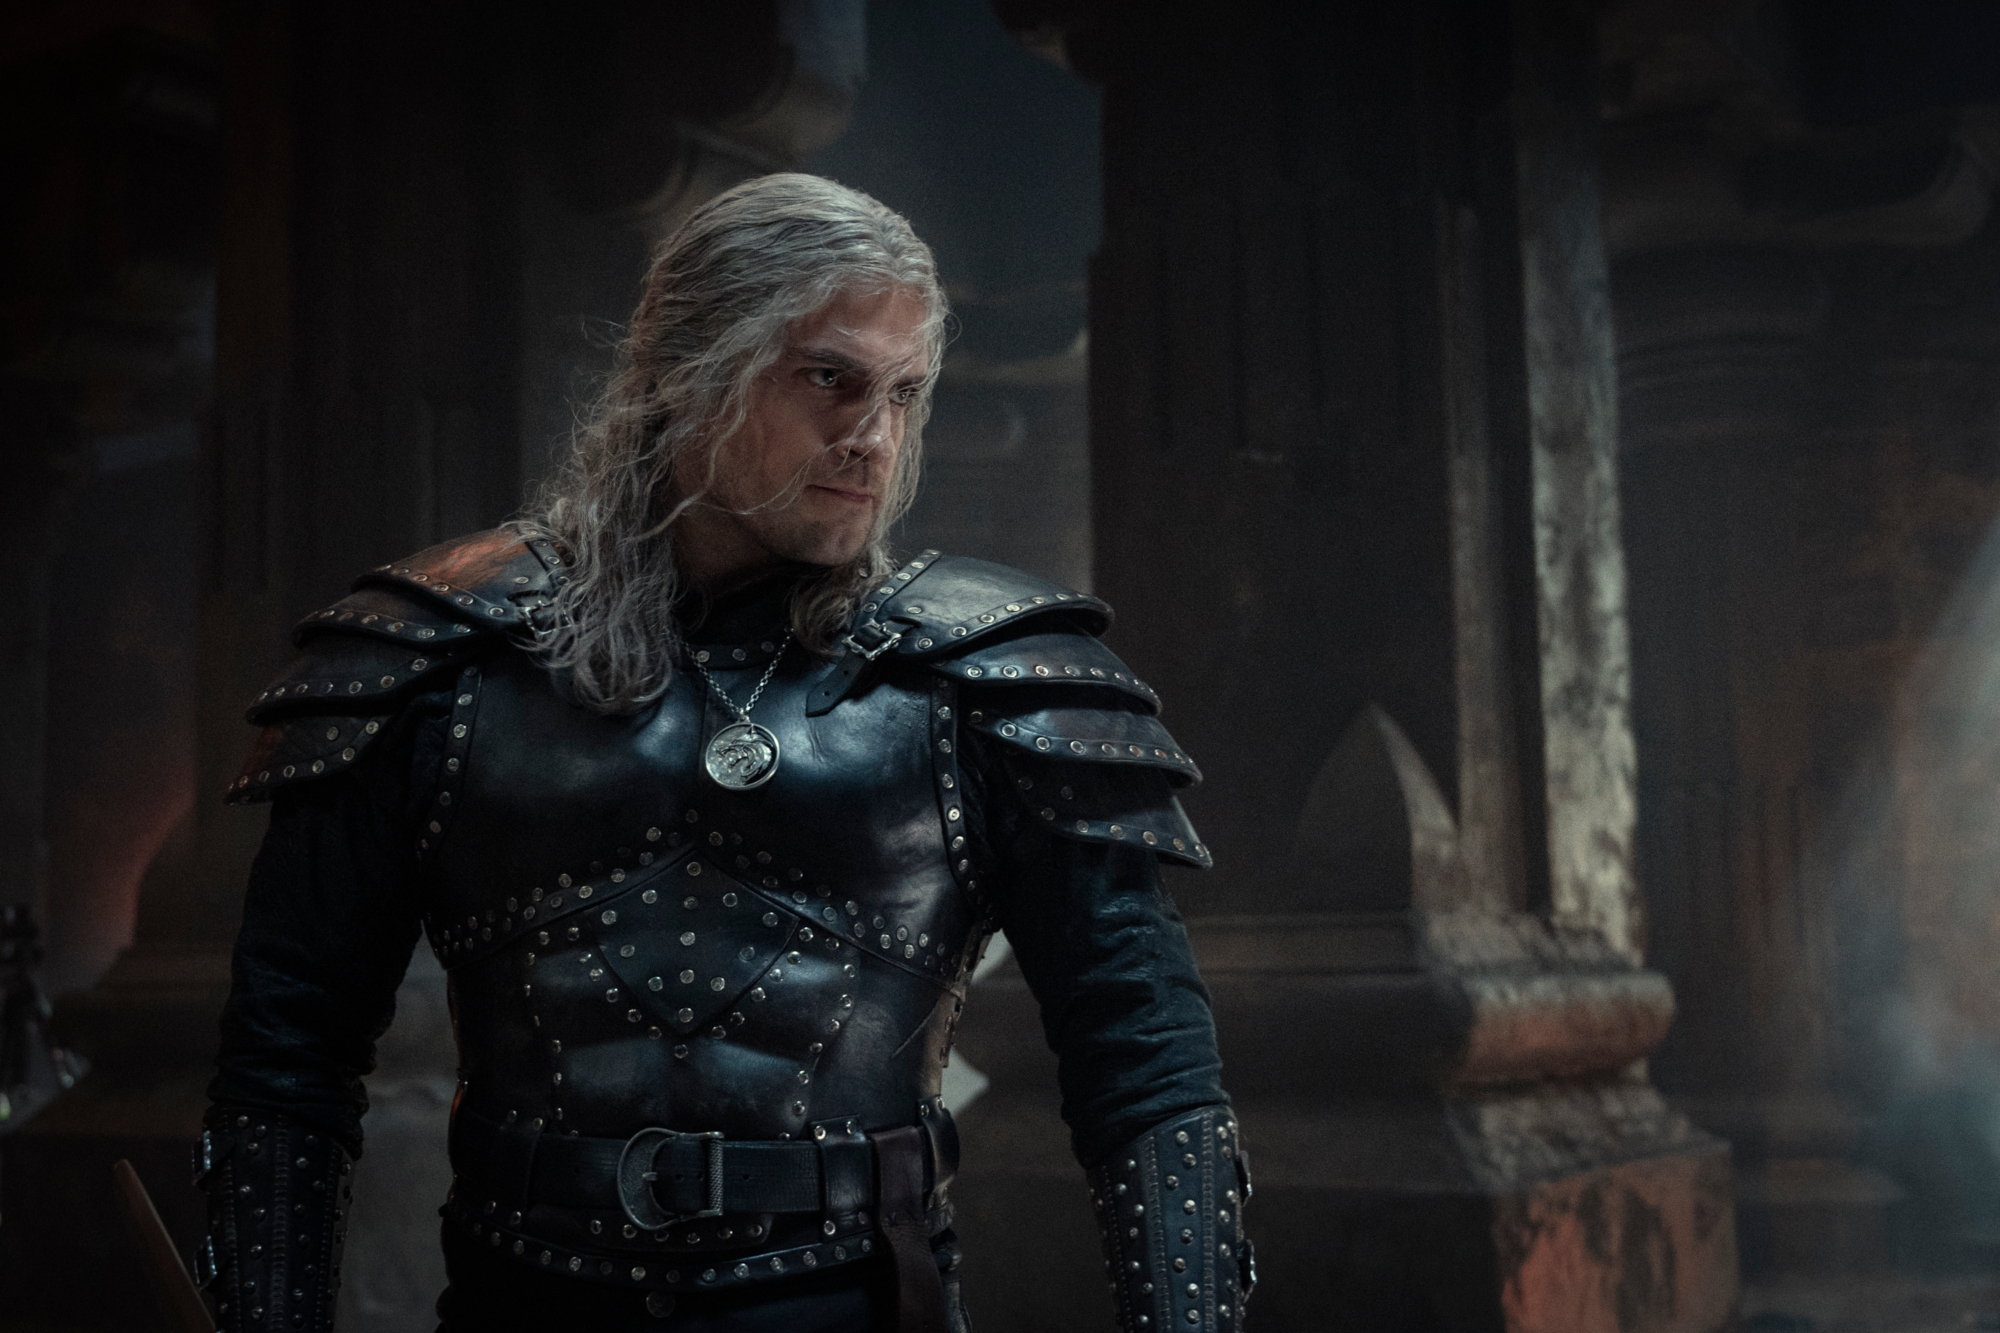 'The Witcher' star Henry Cavill as Geralt of Rivia in season 2 of the Netflix show. He's wearing black armor and looks ready to fight.